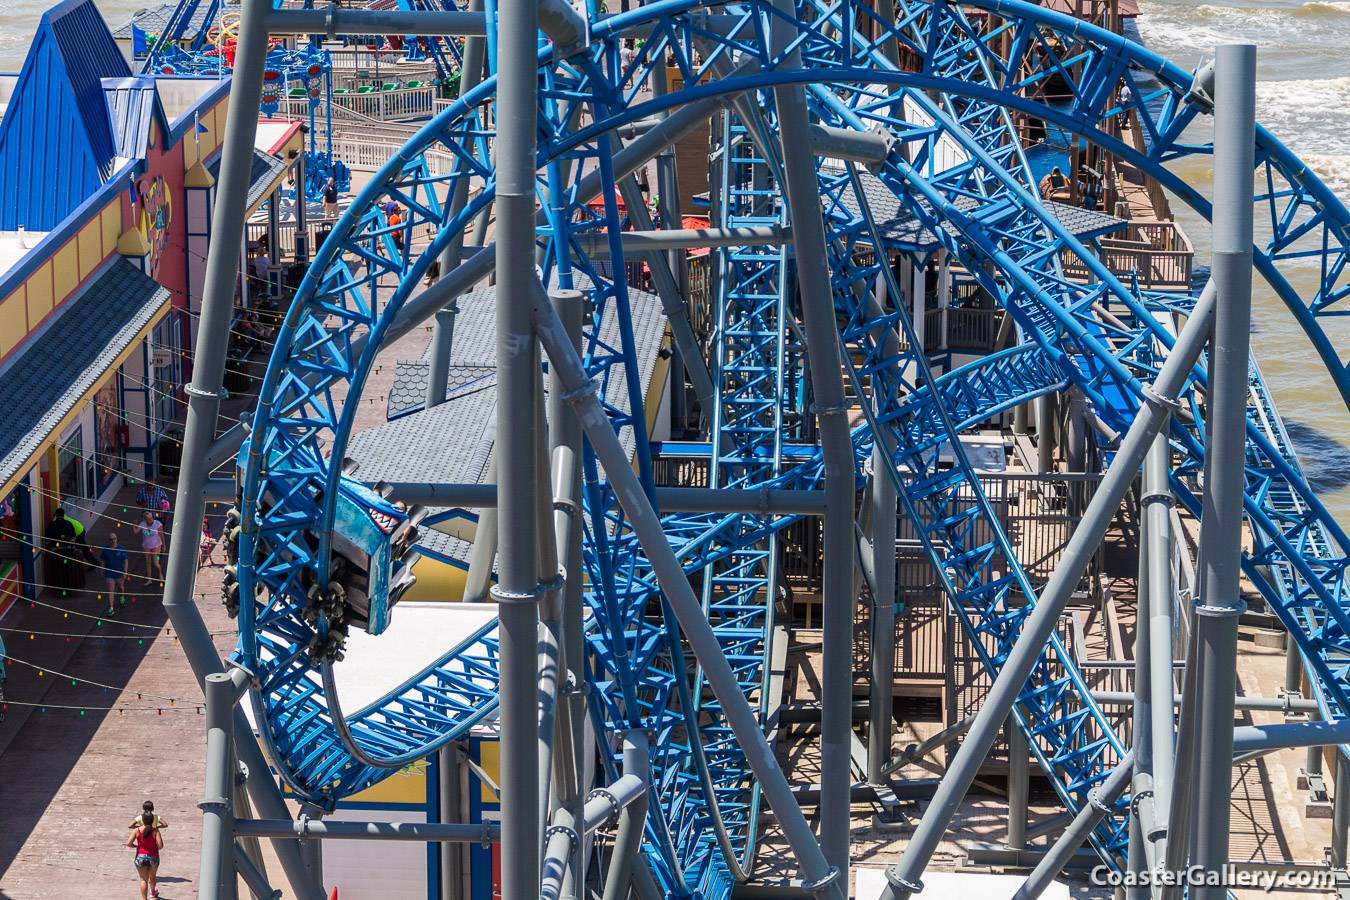 A tangle of blue roller coaster track - Picture by CoasterGallery.com